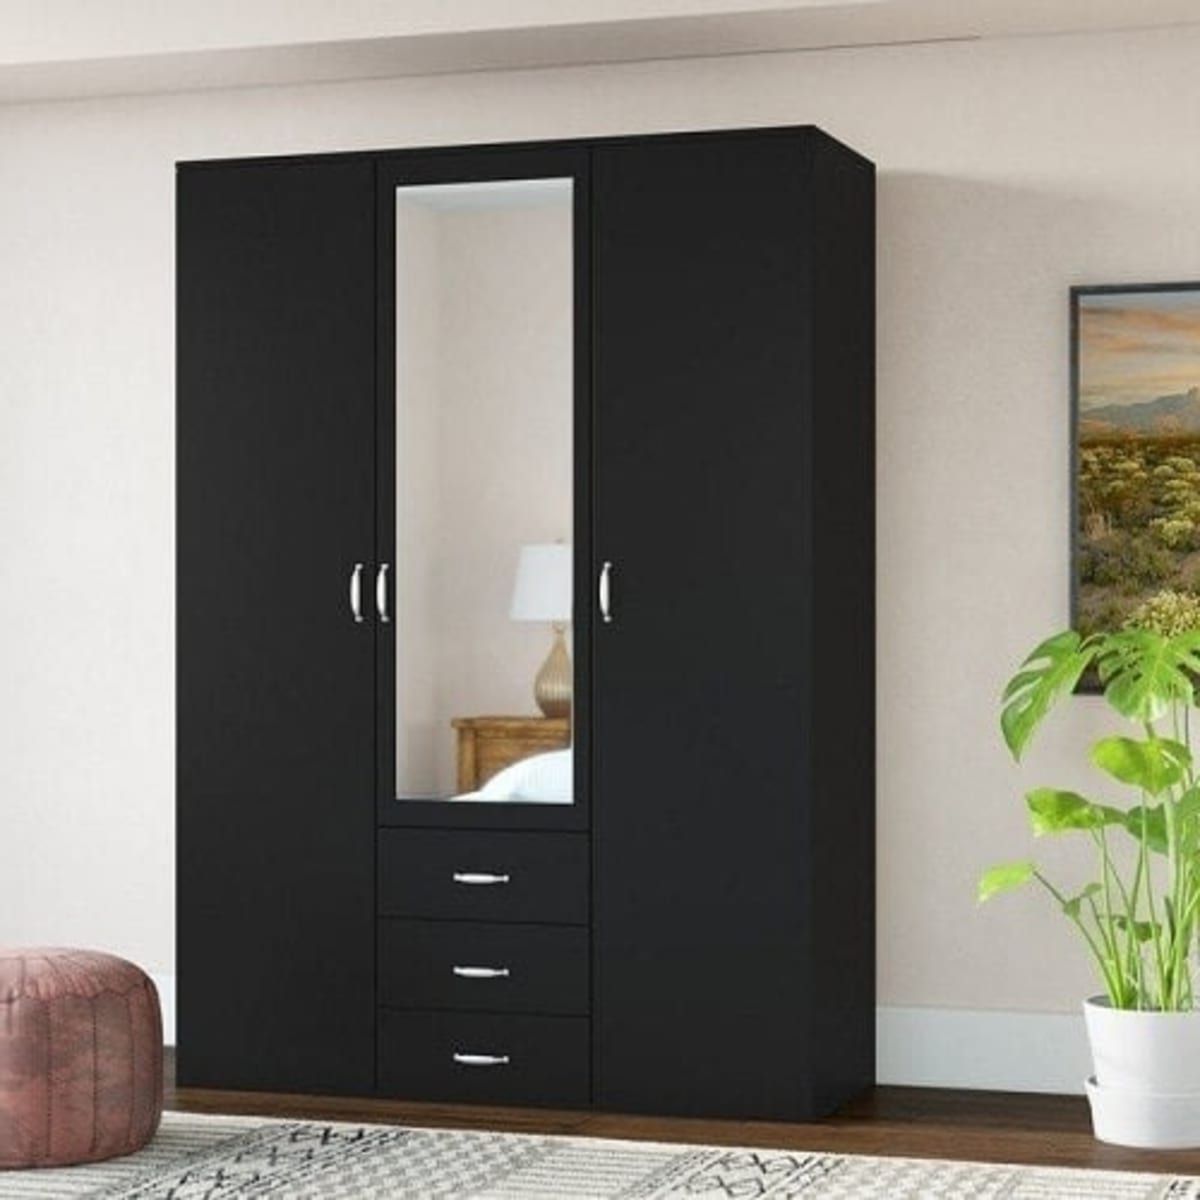 Beyond 3 Door Wardrobe With 3 Drawer And Mirror Black | Konga Online  Shopping Within Three Door Wardrobes With Mirror (View 4 of 20)